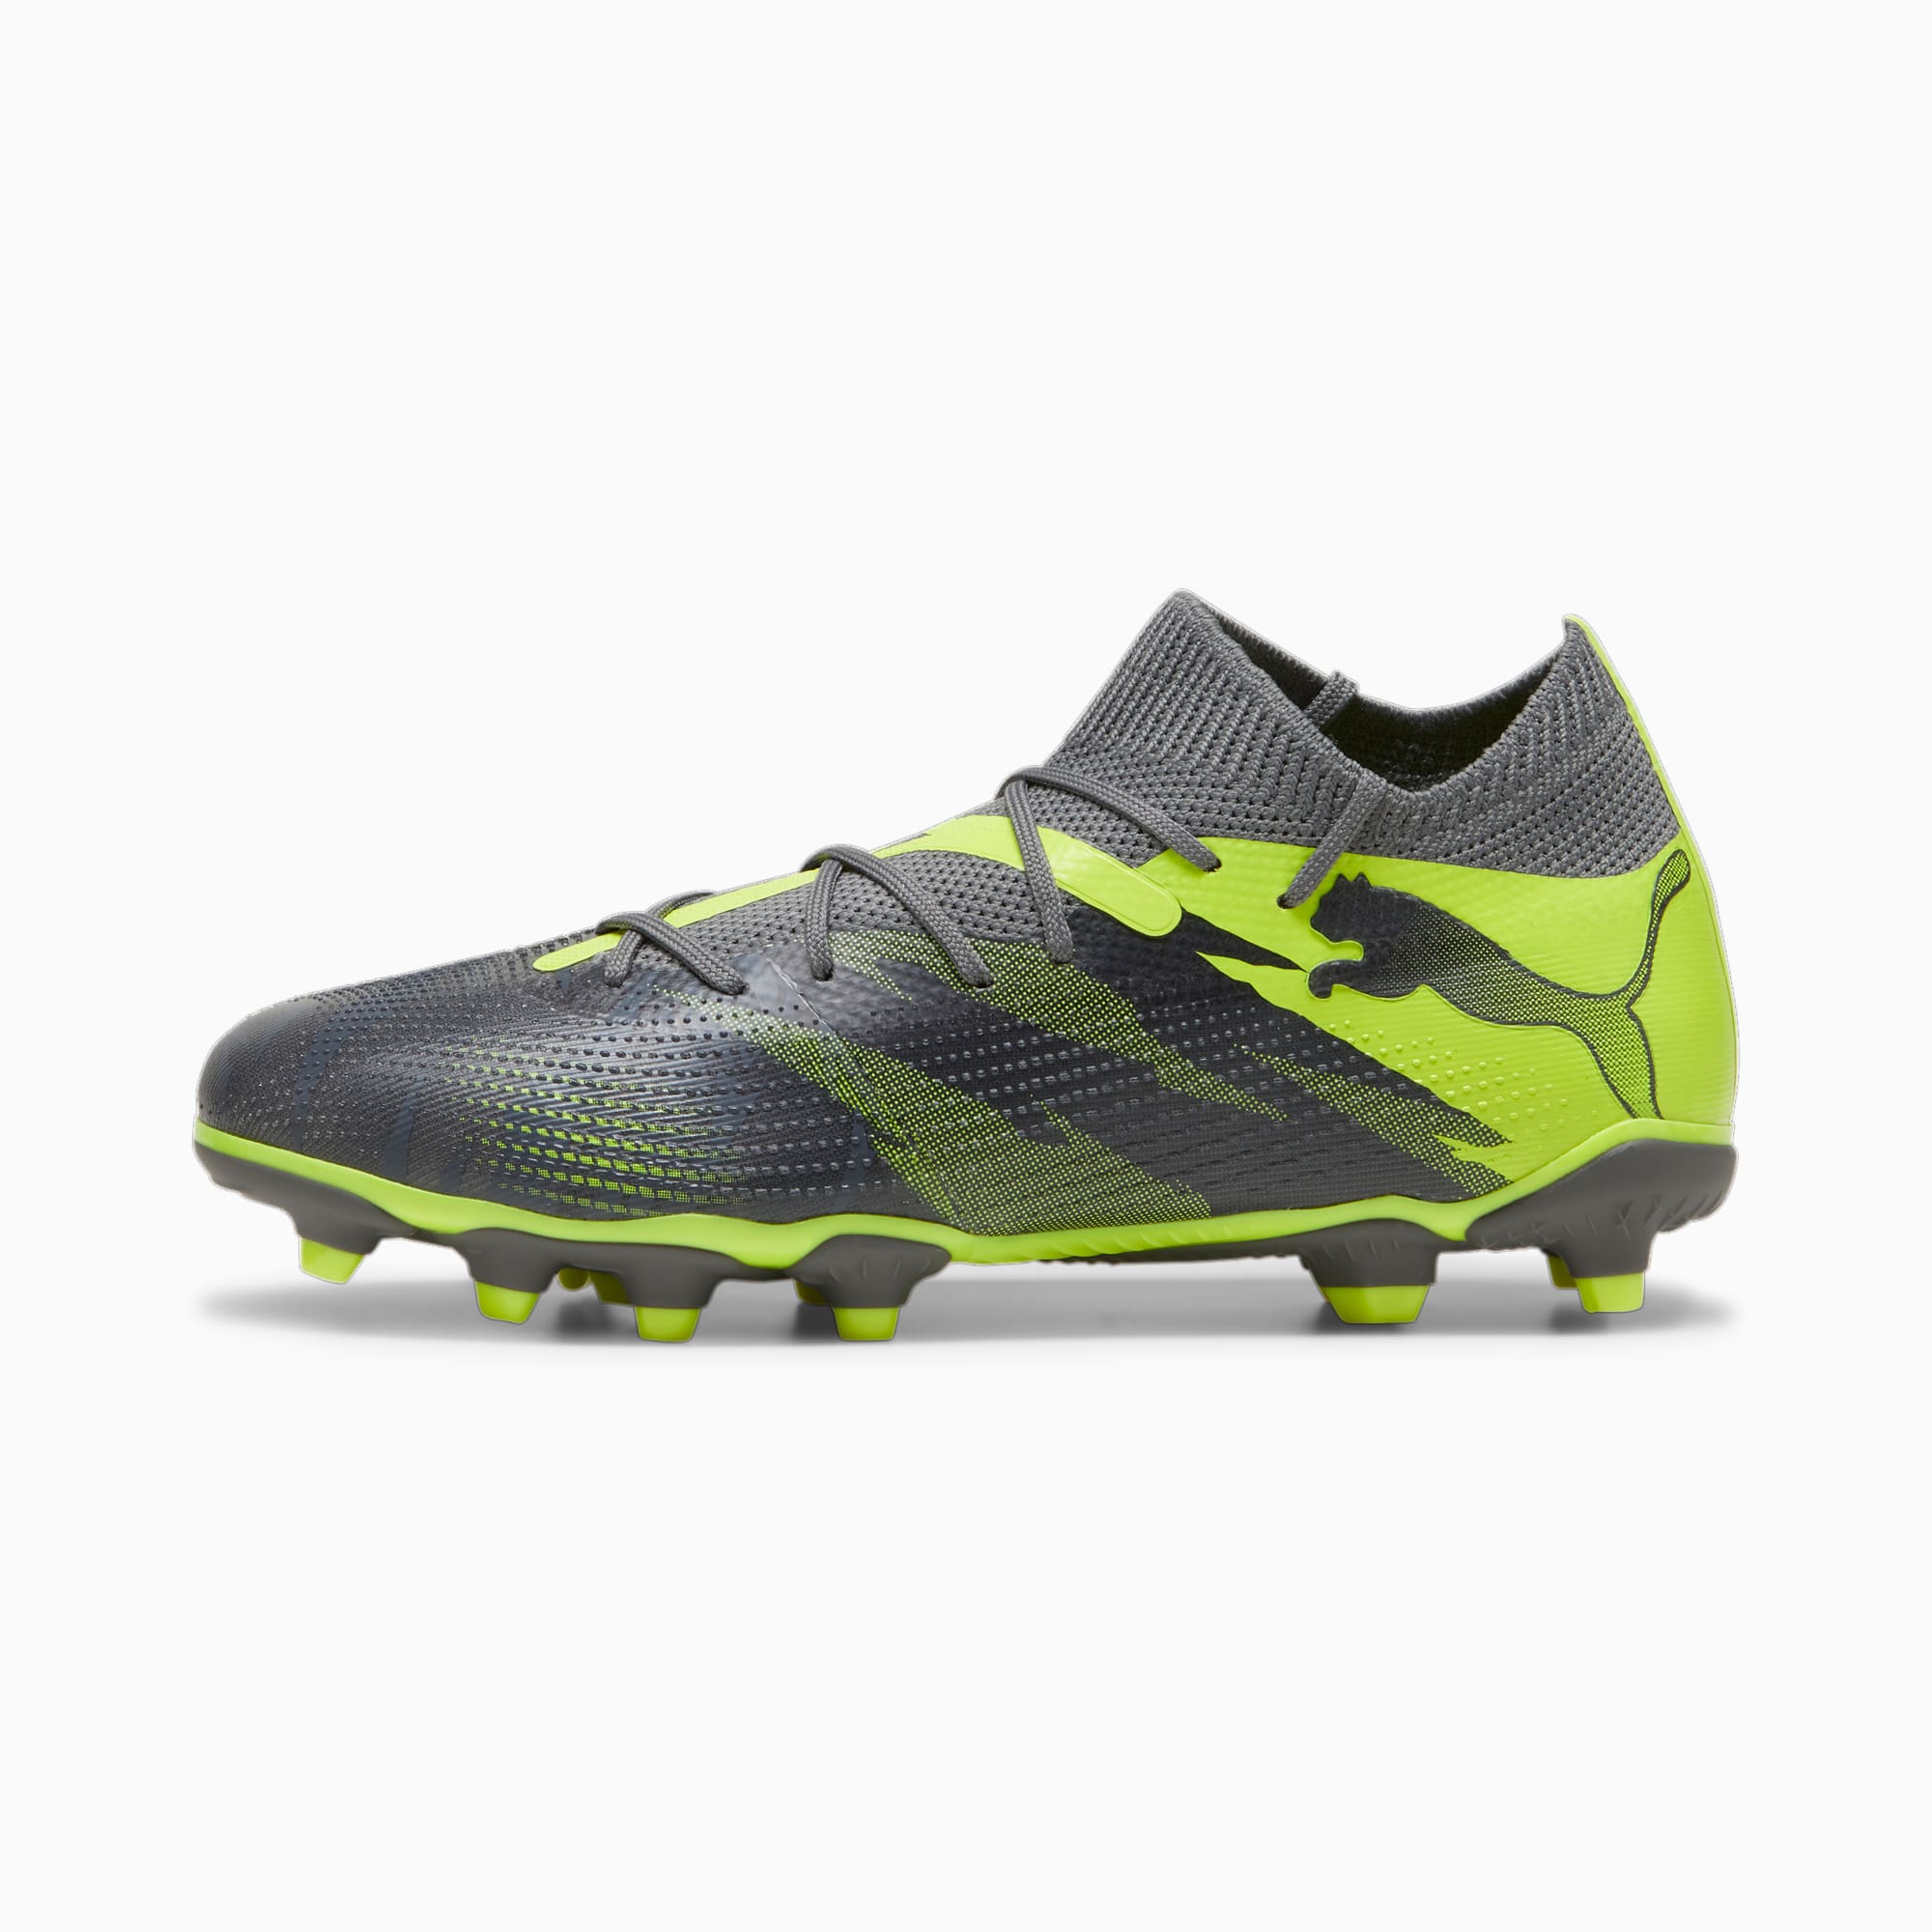 FUTURE 7 Match Rush Youth FG/AG Football Boots